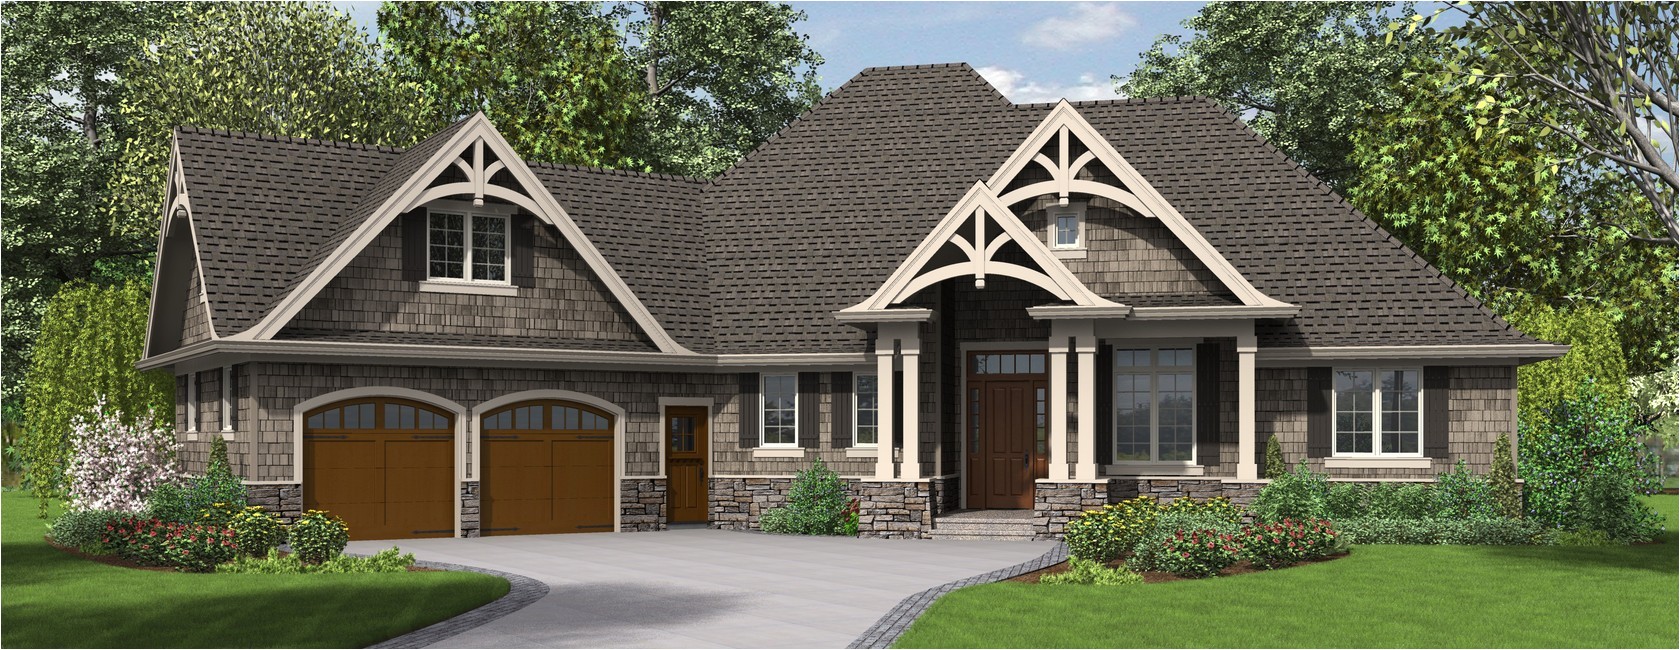 Single Story Craftsman Home Plans the Ripley Single Story Craftsman House Plan with tons Of